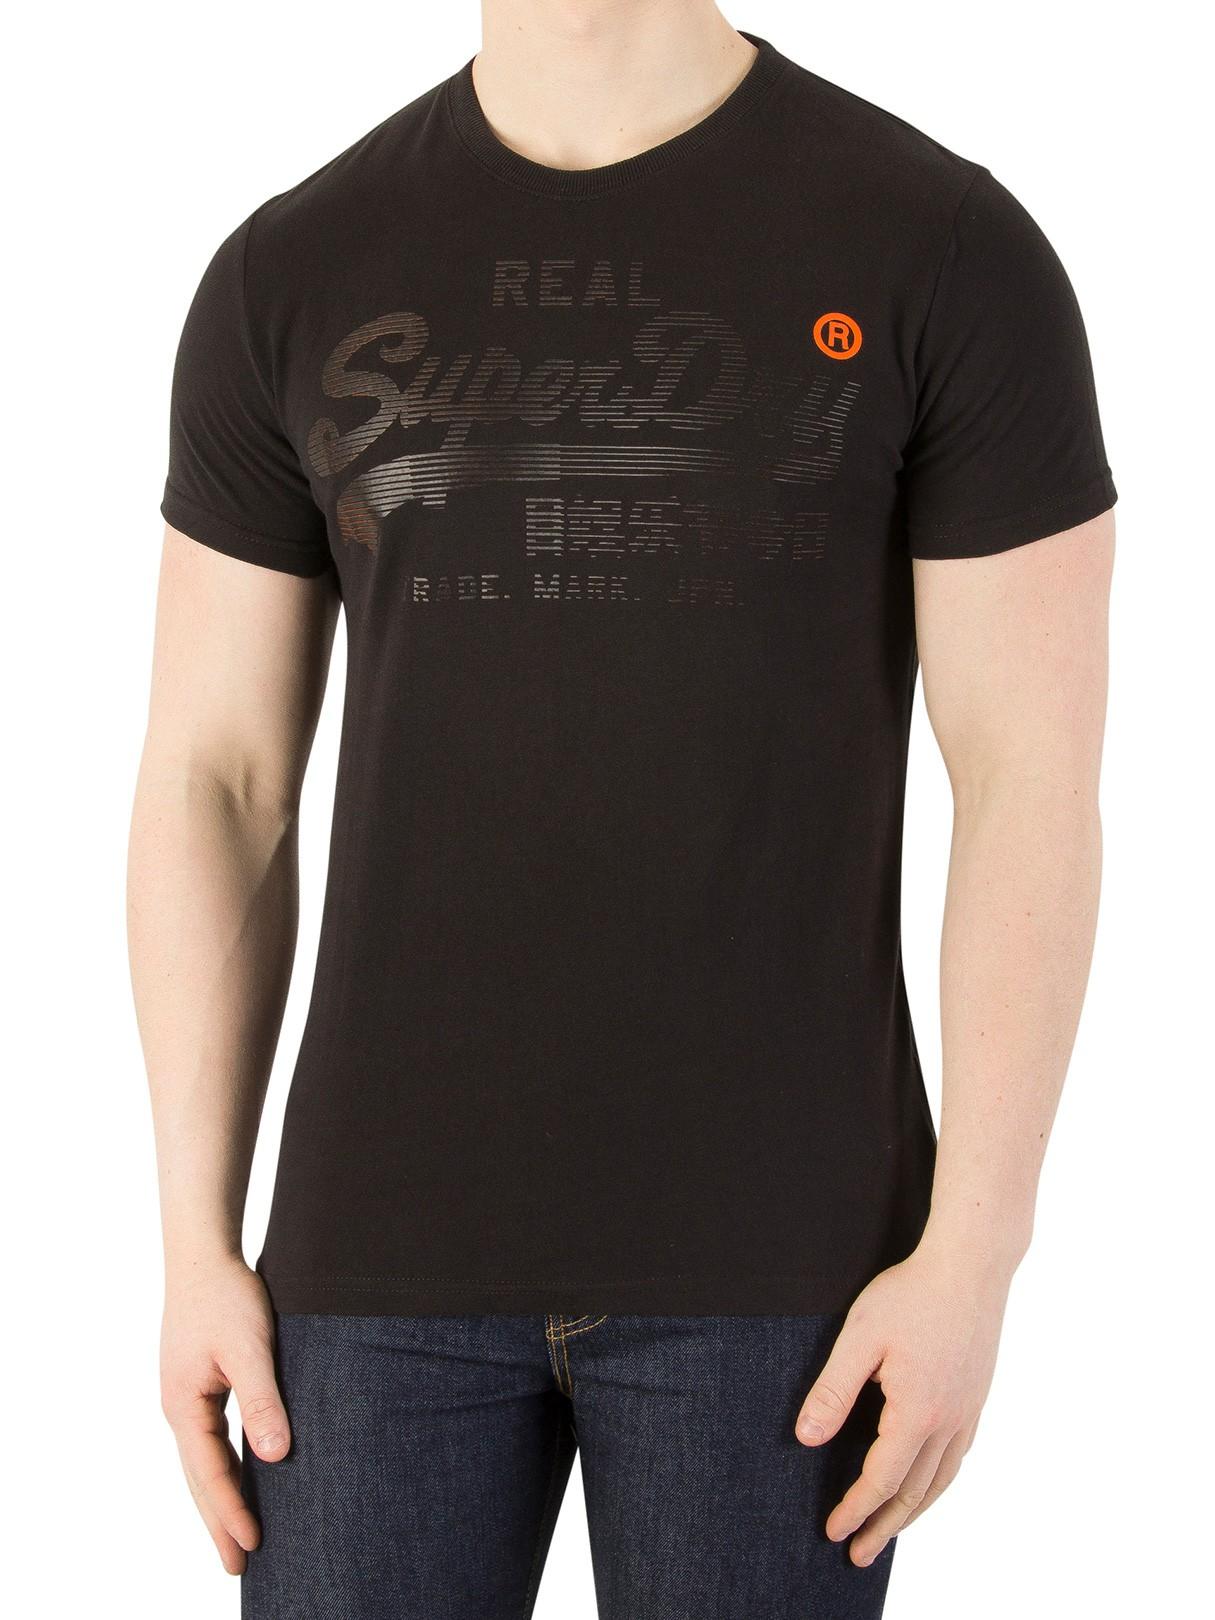 Superdry Cotton Real Logo 1st T-shirt in Black for Men - Lyst